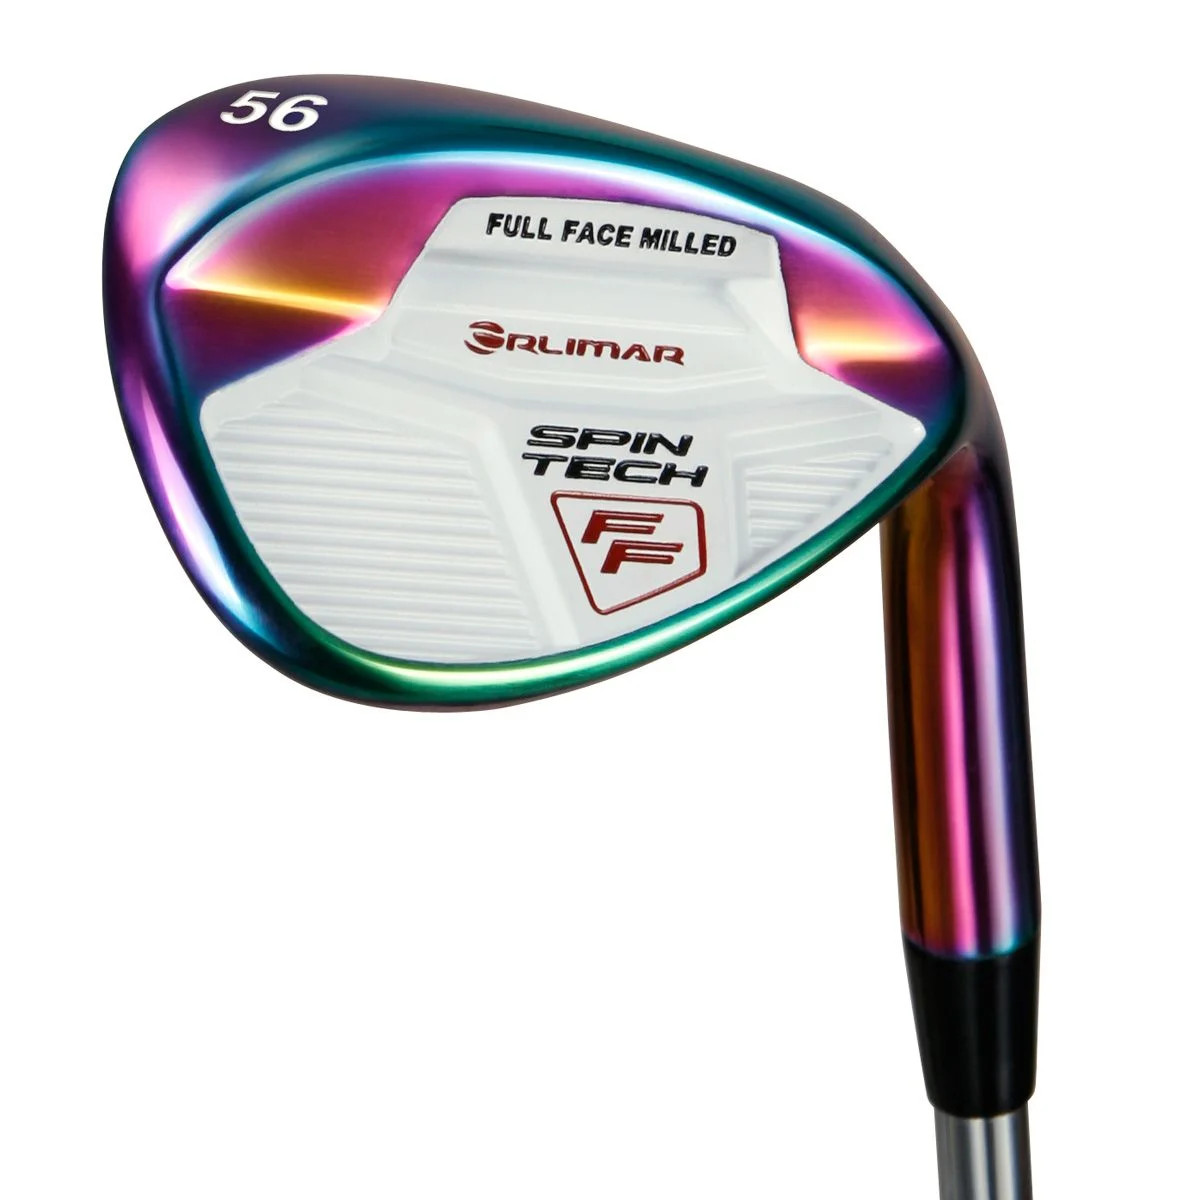 Orlimar Spin Tech Full Face Iridescent PVD Finish Wedges, 52,56,60